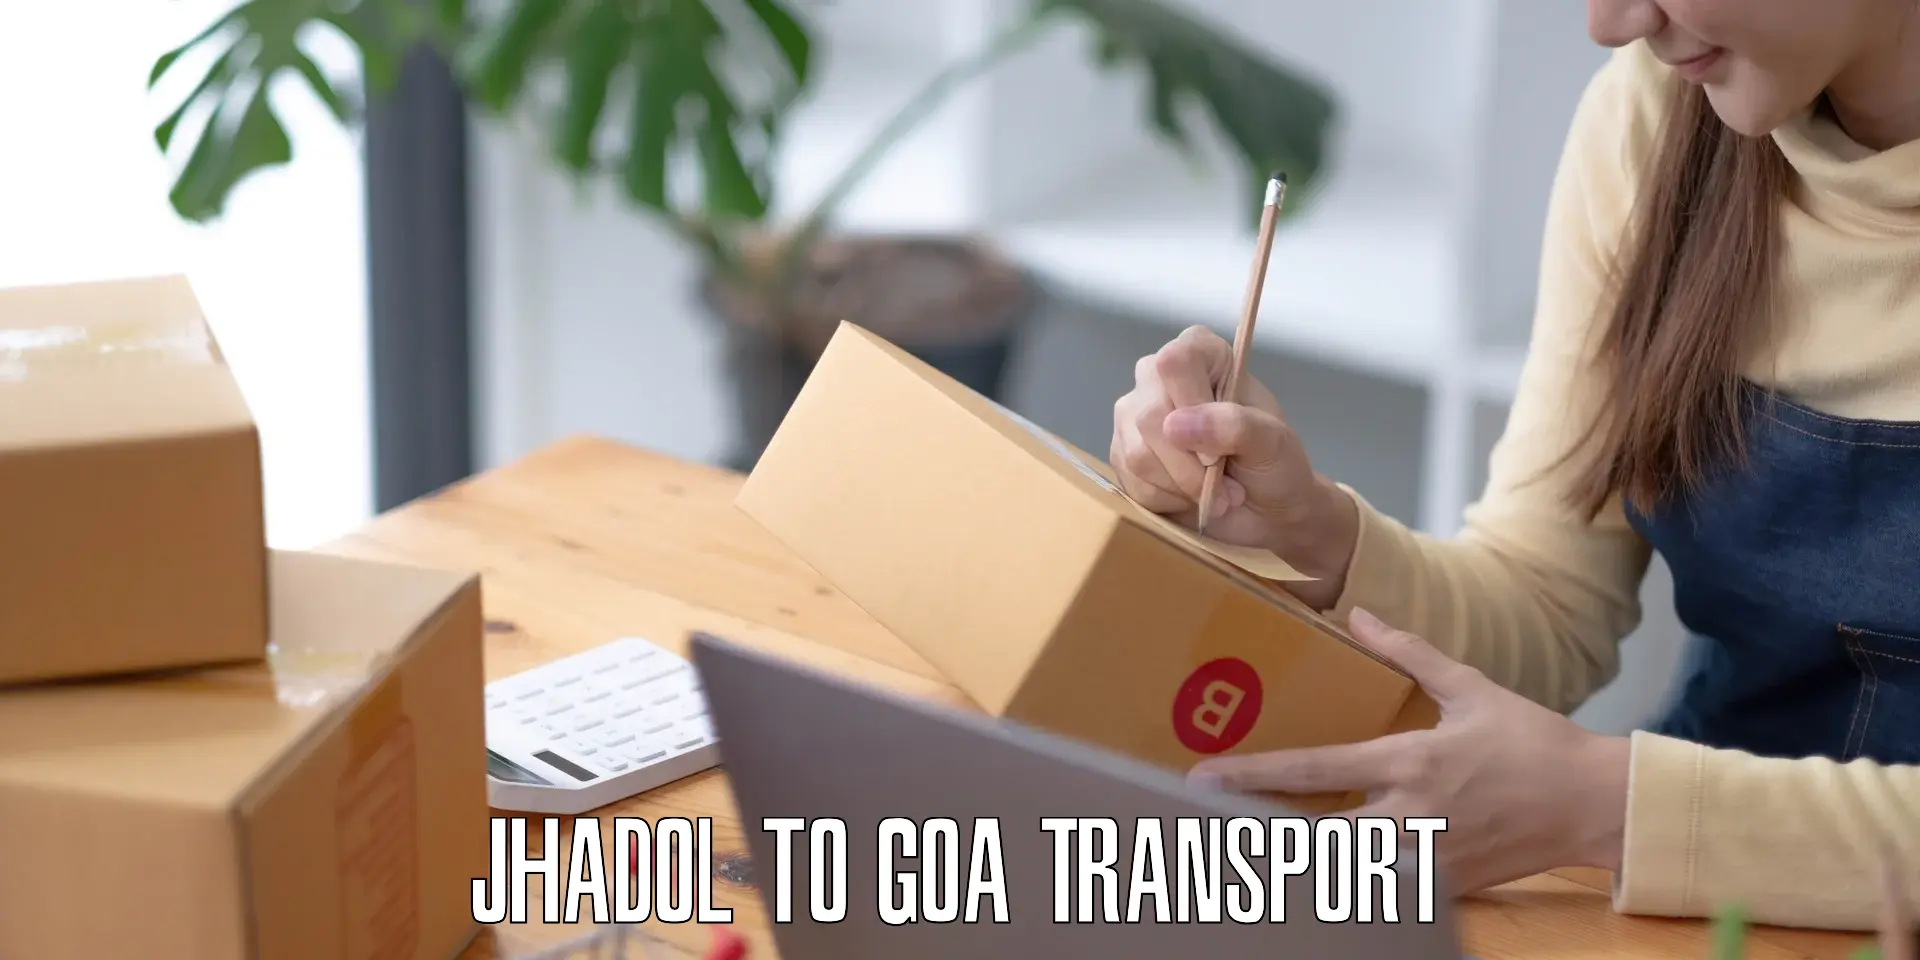 Delivery service Jhadol to South Goa